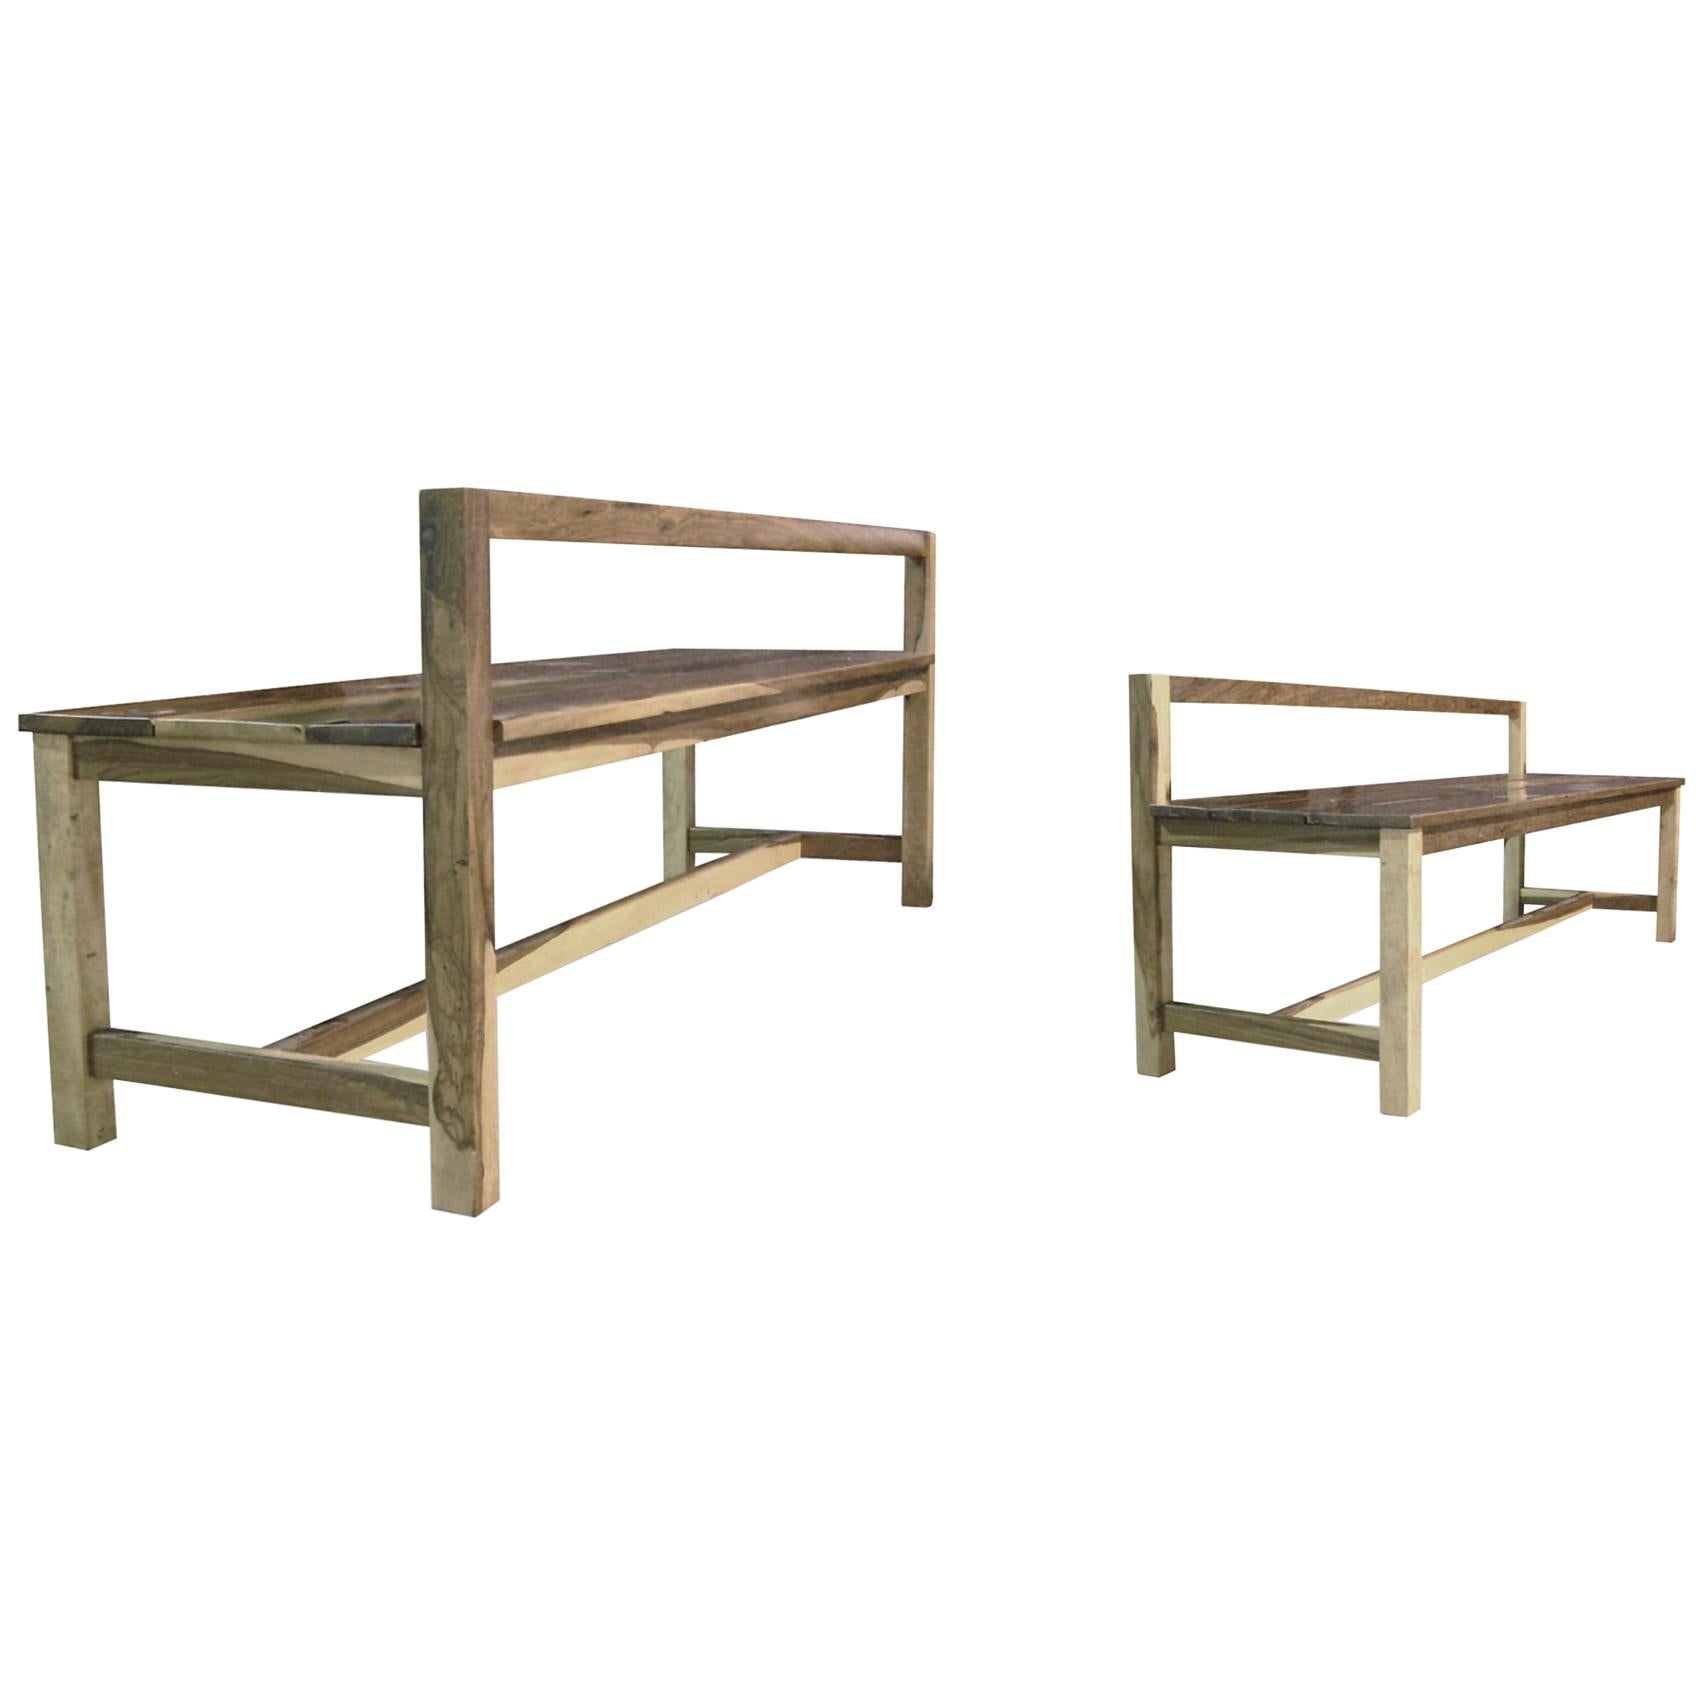 Modern Solid Argentine Rosewood Outdoor Bench from Costantini, Serrano